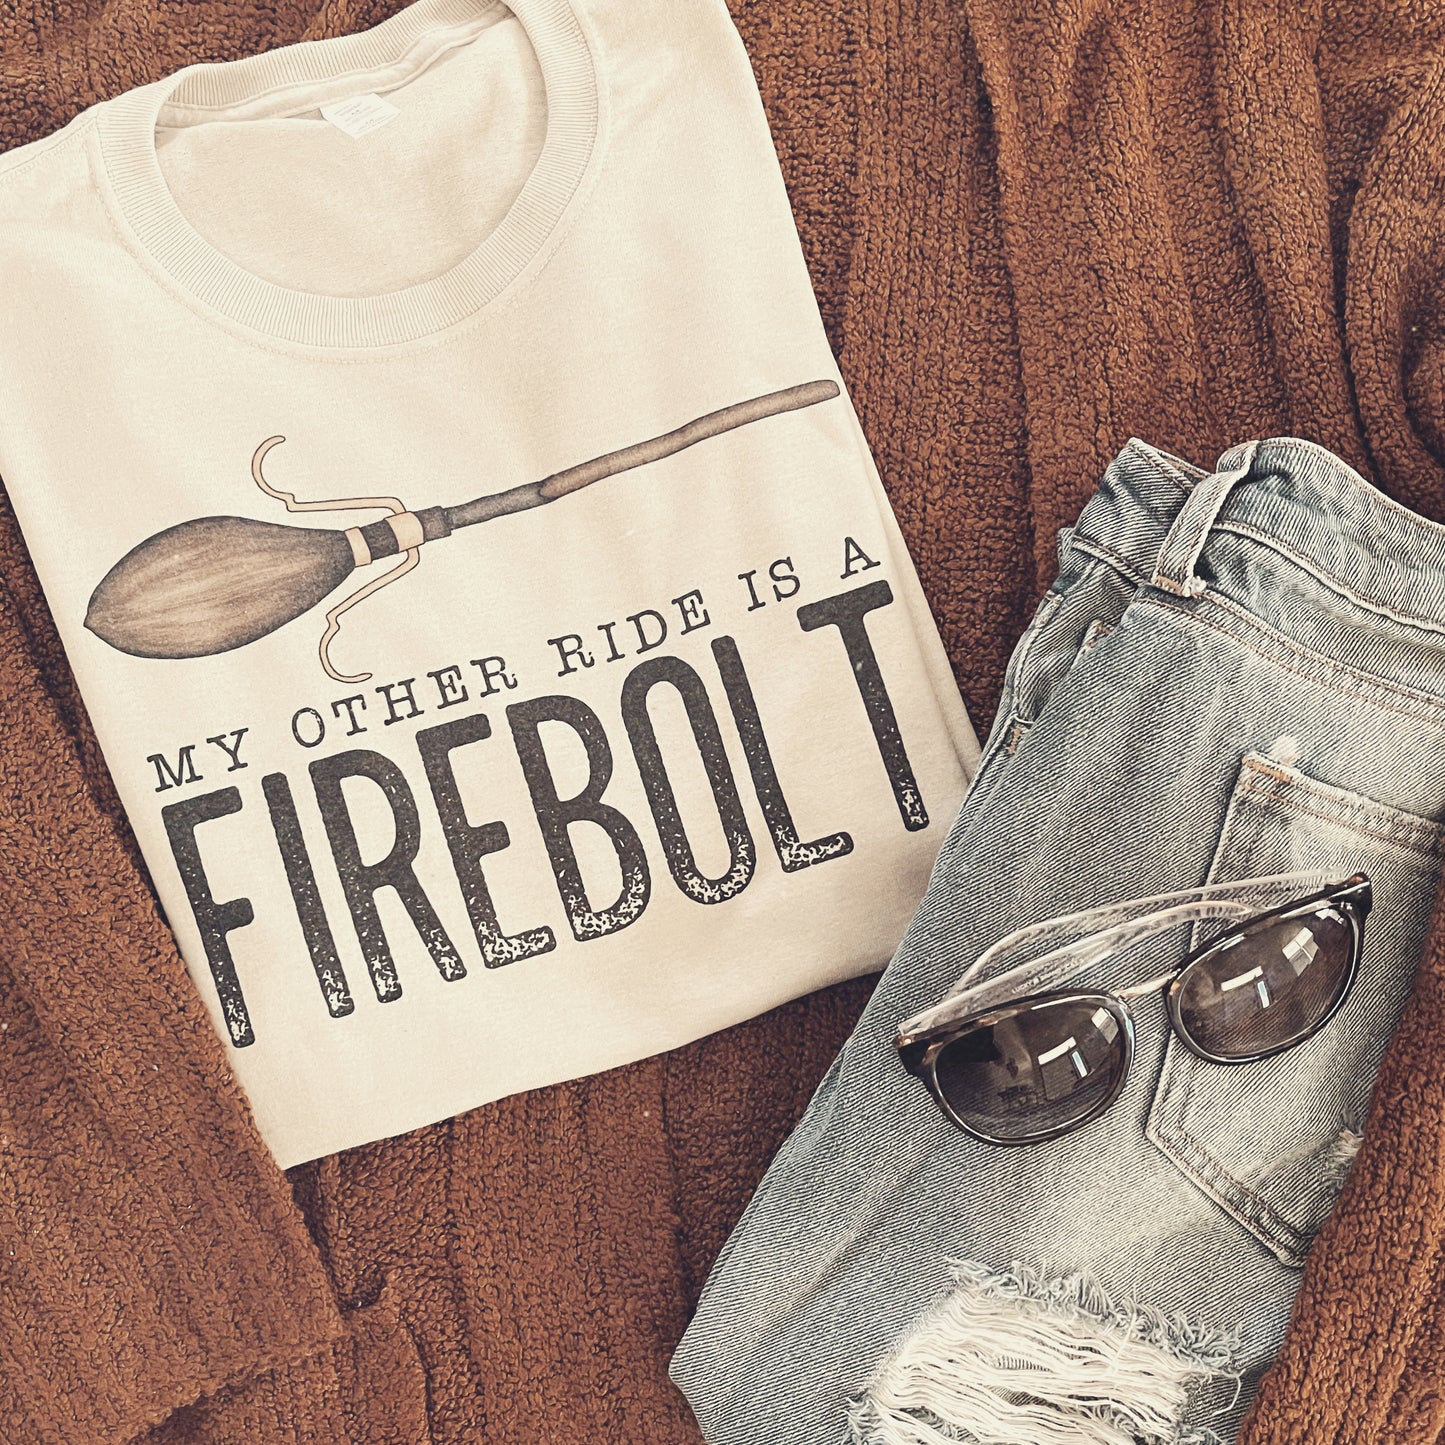 My other ride is Firebolt Unisex Graphic Tee